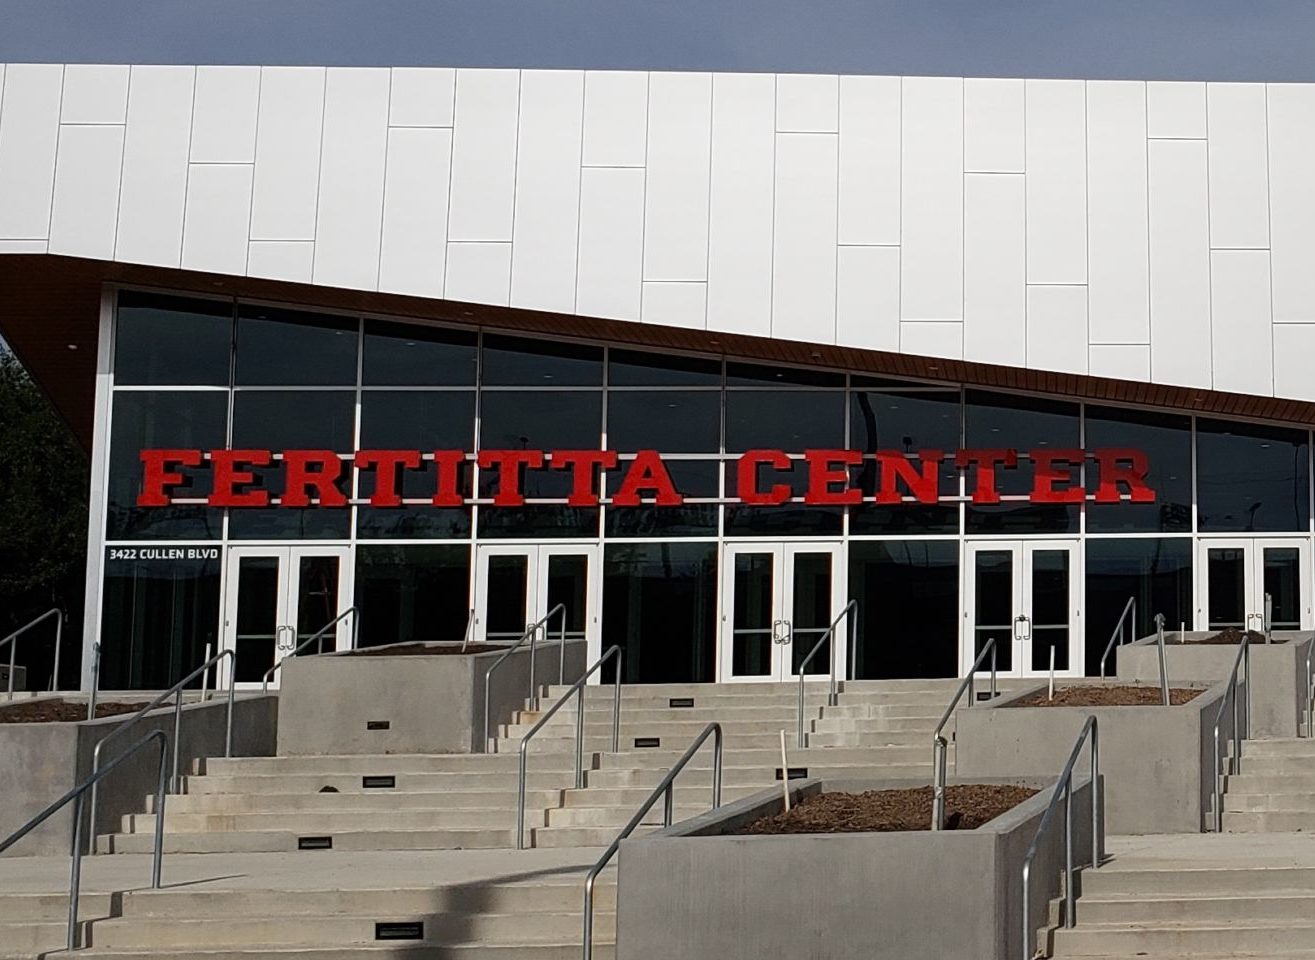 The Cougars packed over 100,000 fans in the Fertitta Center in 2018-19. | File photo